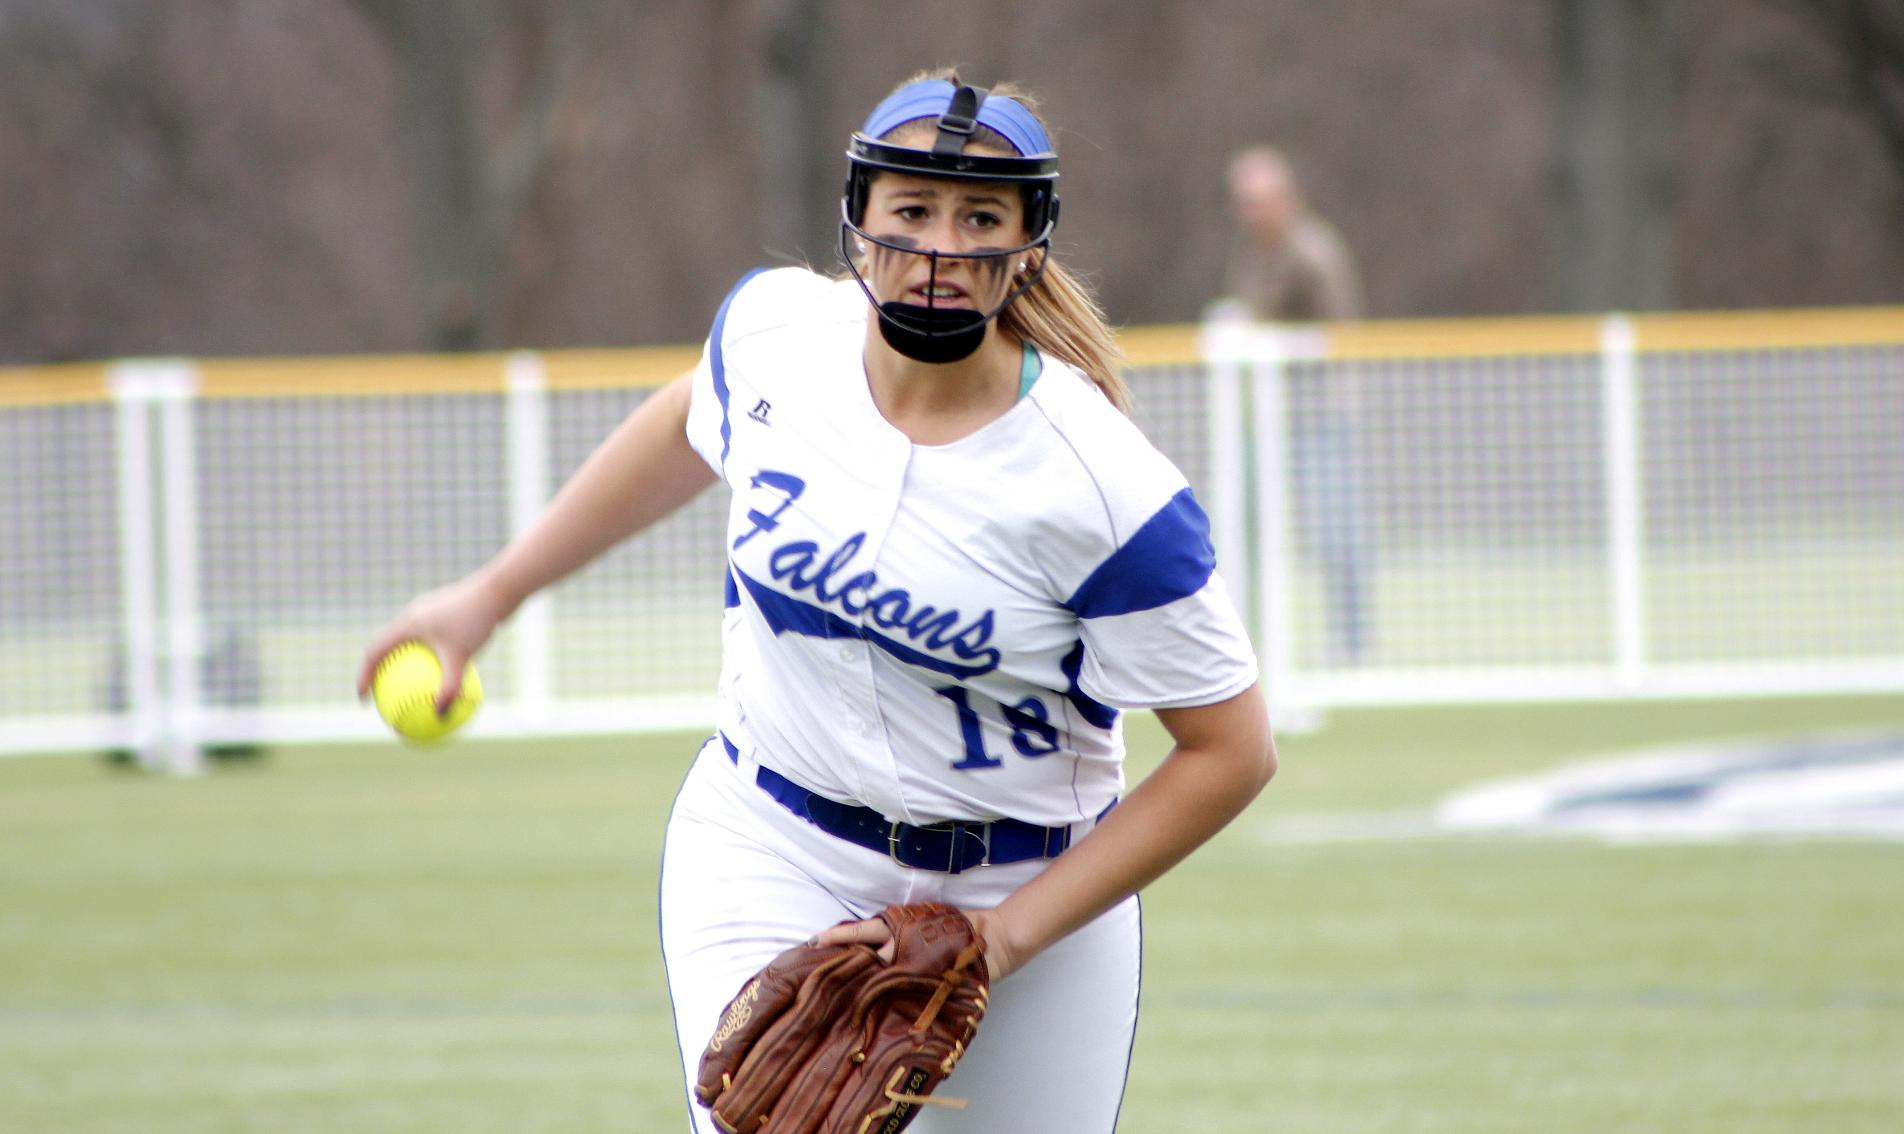 Softball Splits a Conference Doubleheader at Rivier